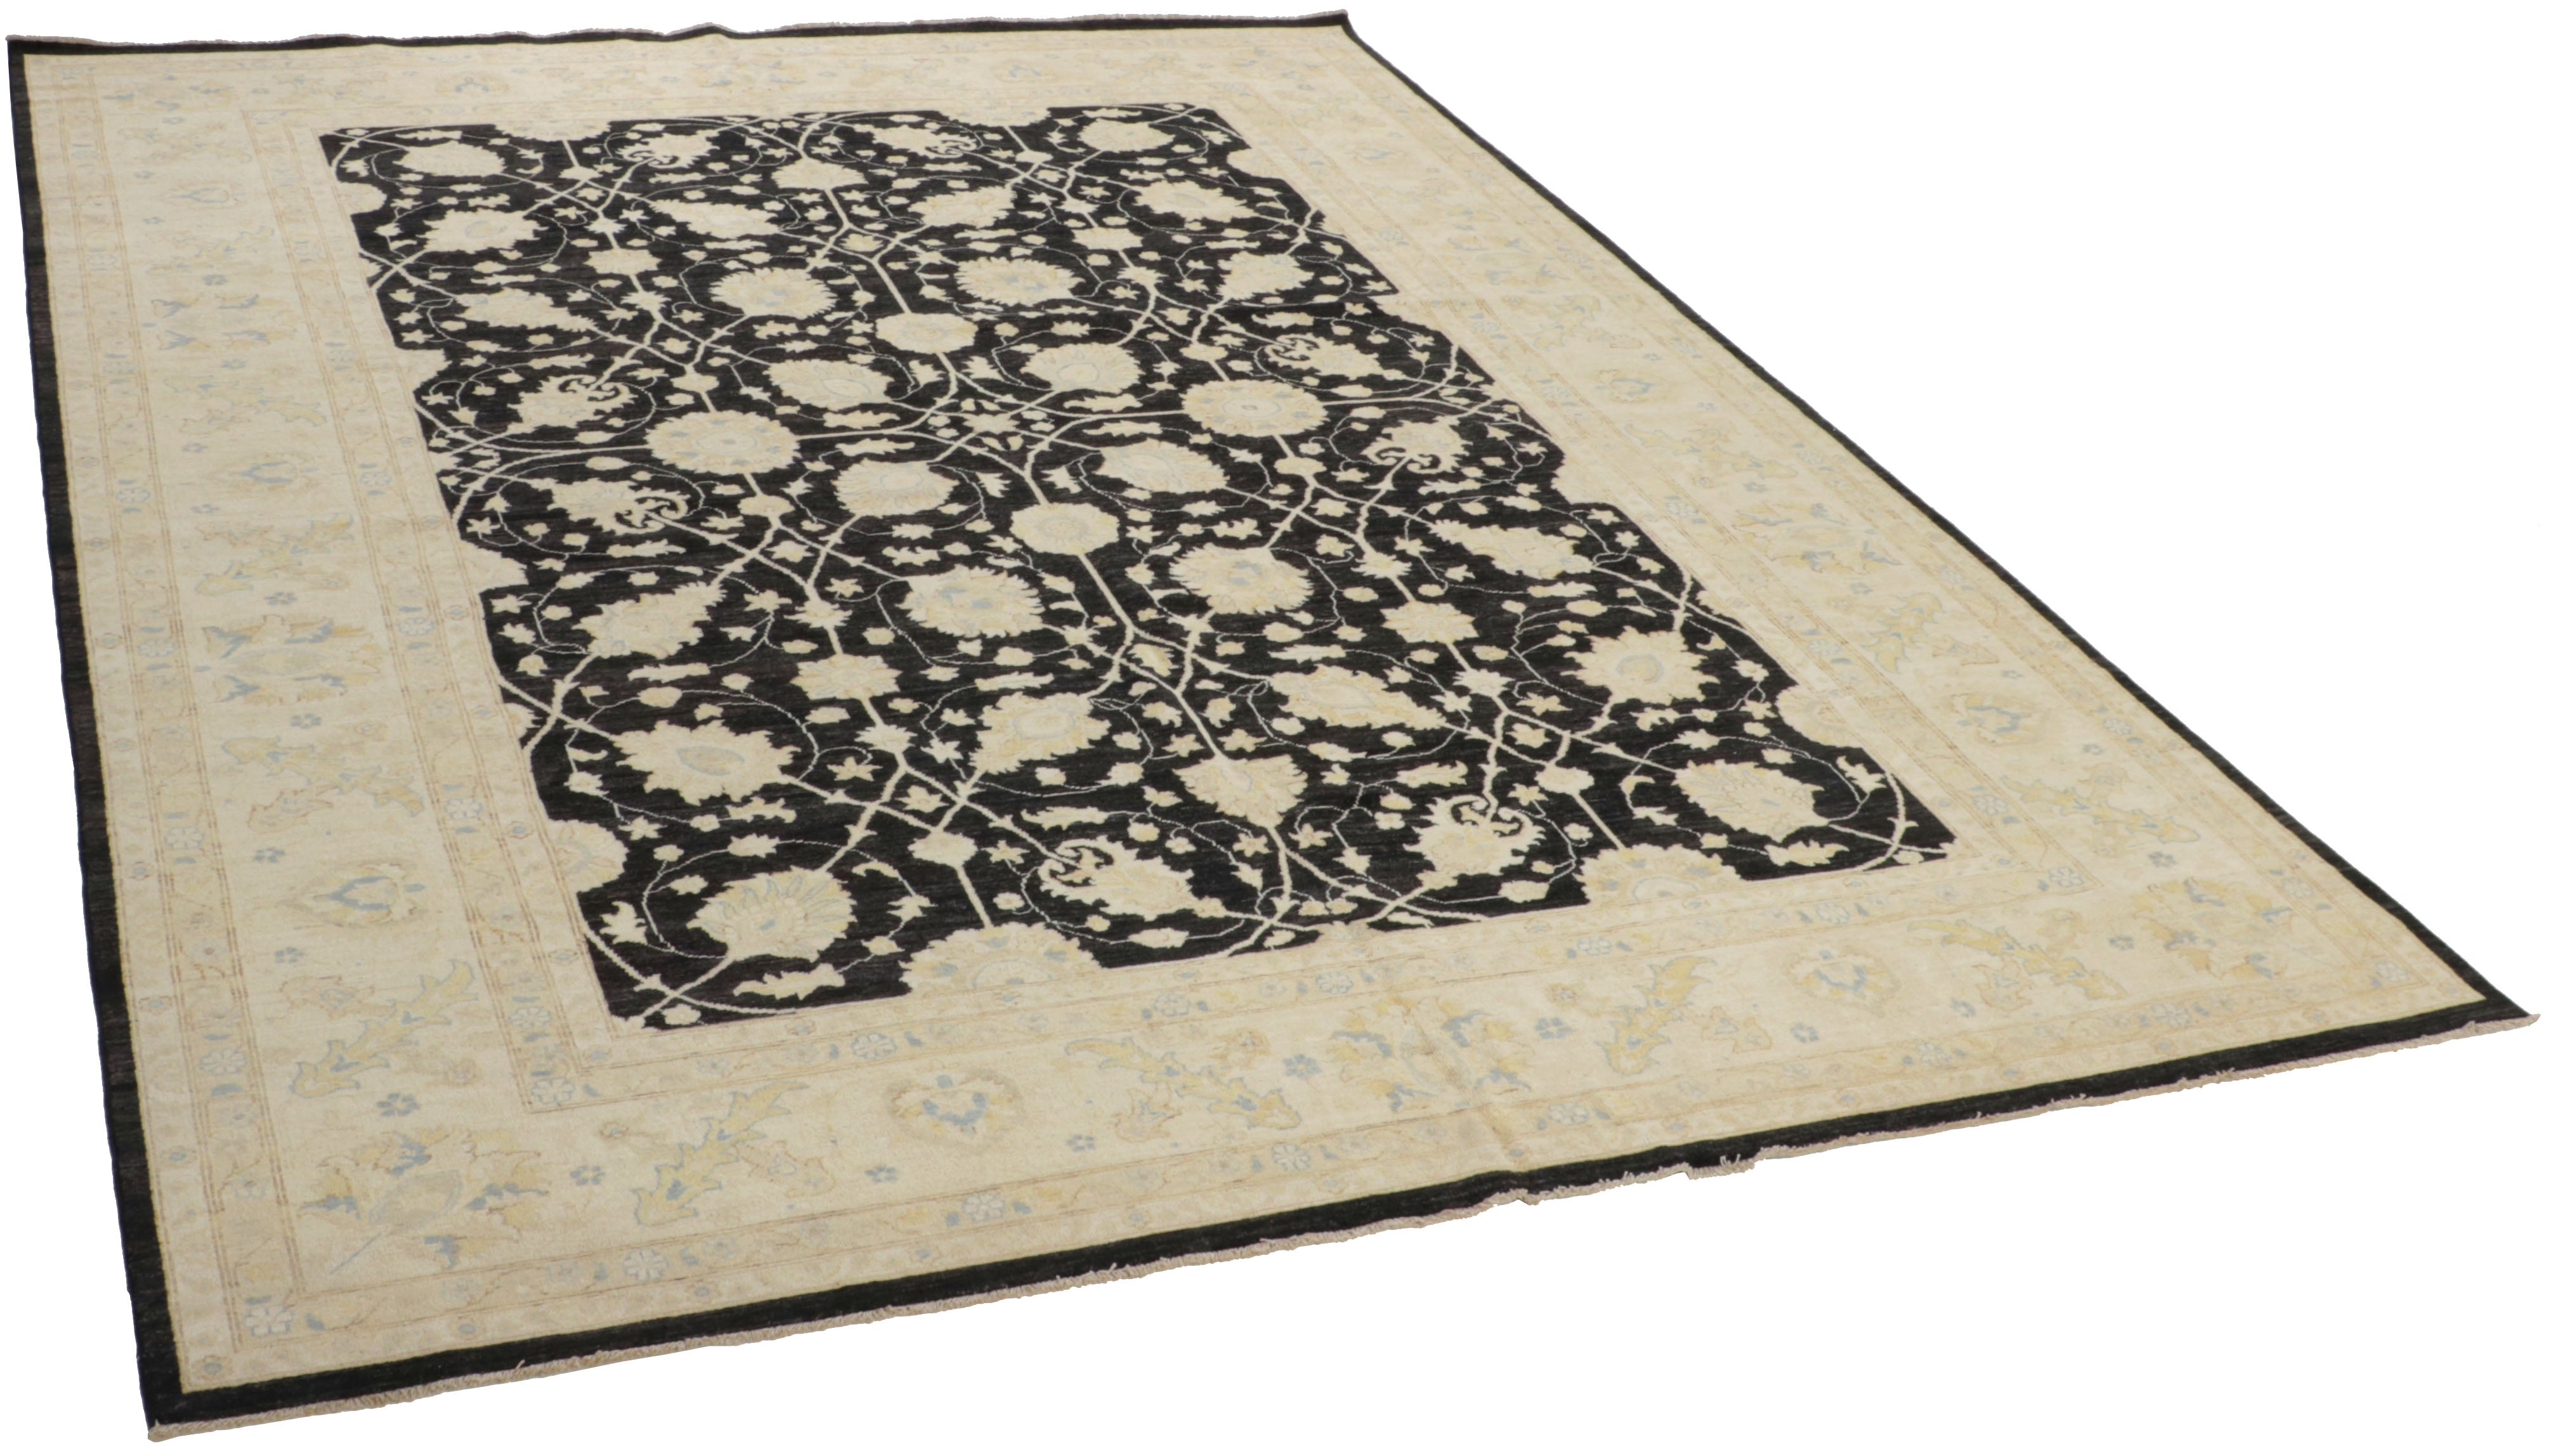 Authentic oriental rug with delicate floral pattern in black and ivory